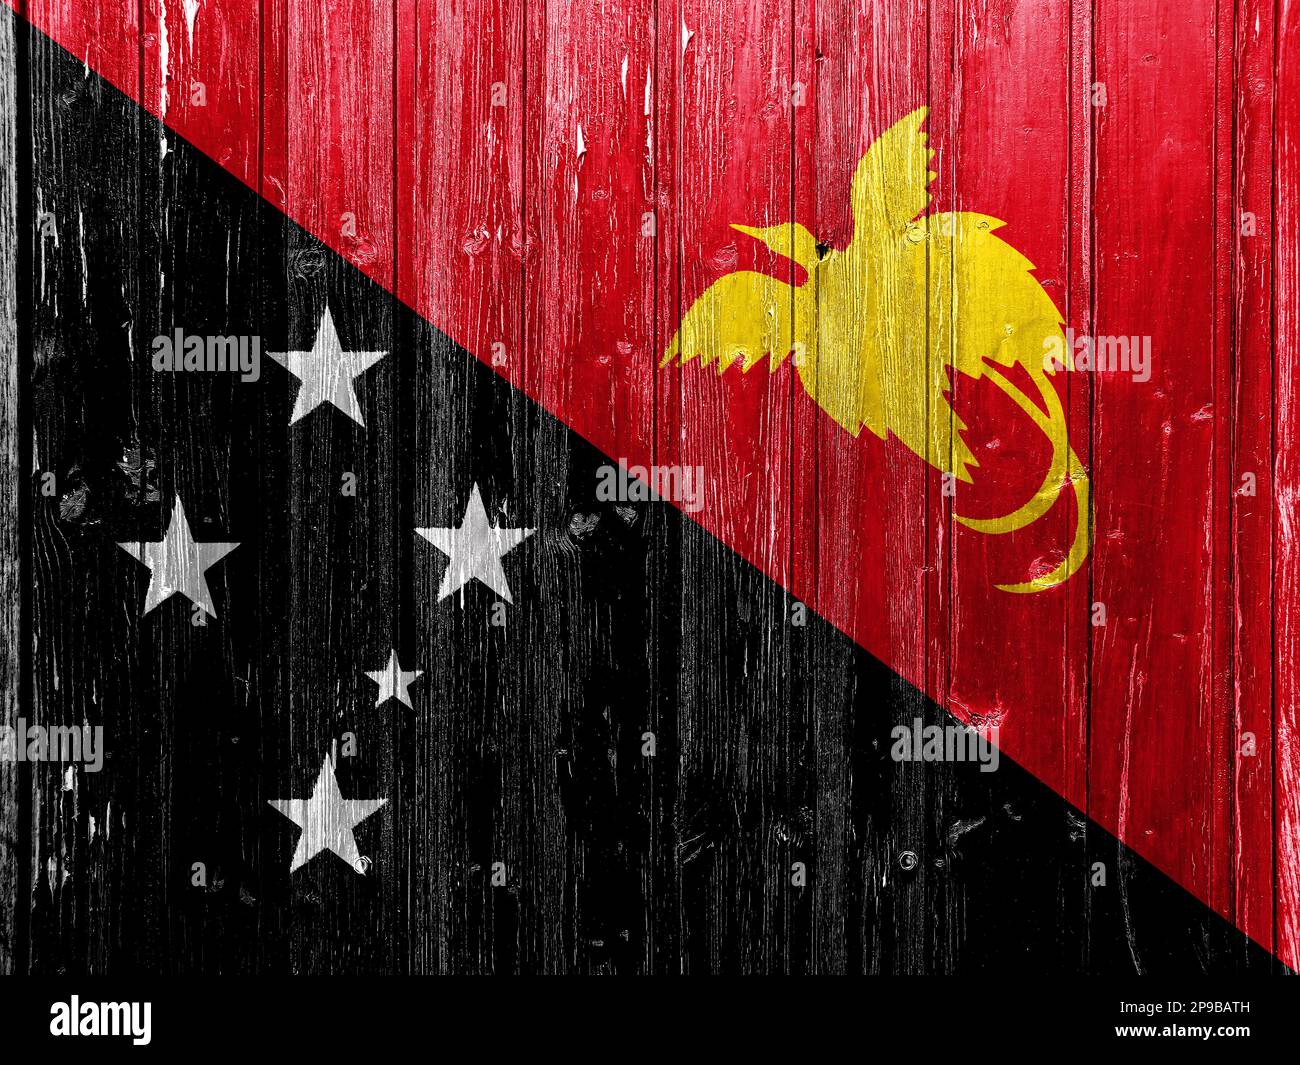 Flag of Papua New Guinea on a textured background. Concept collage. Stock Photo